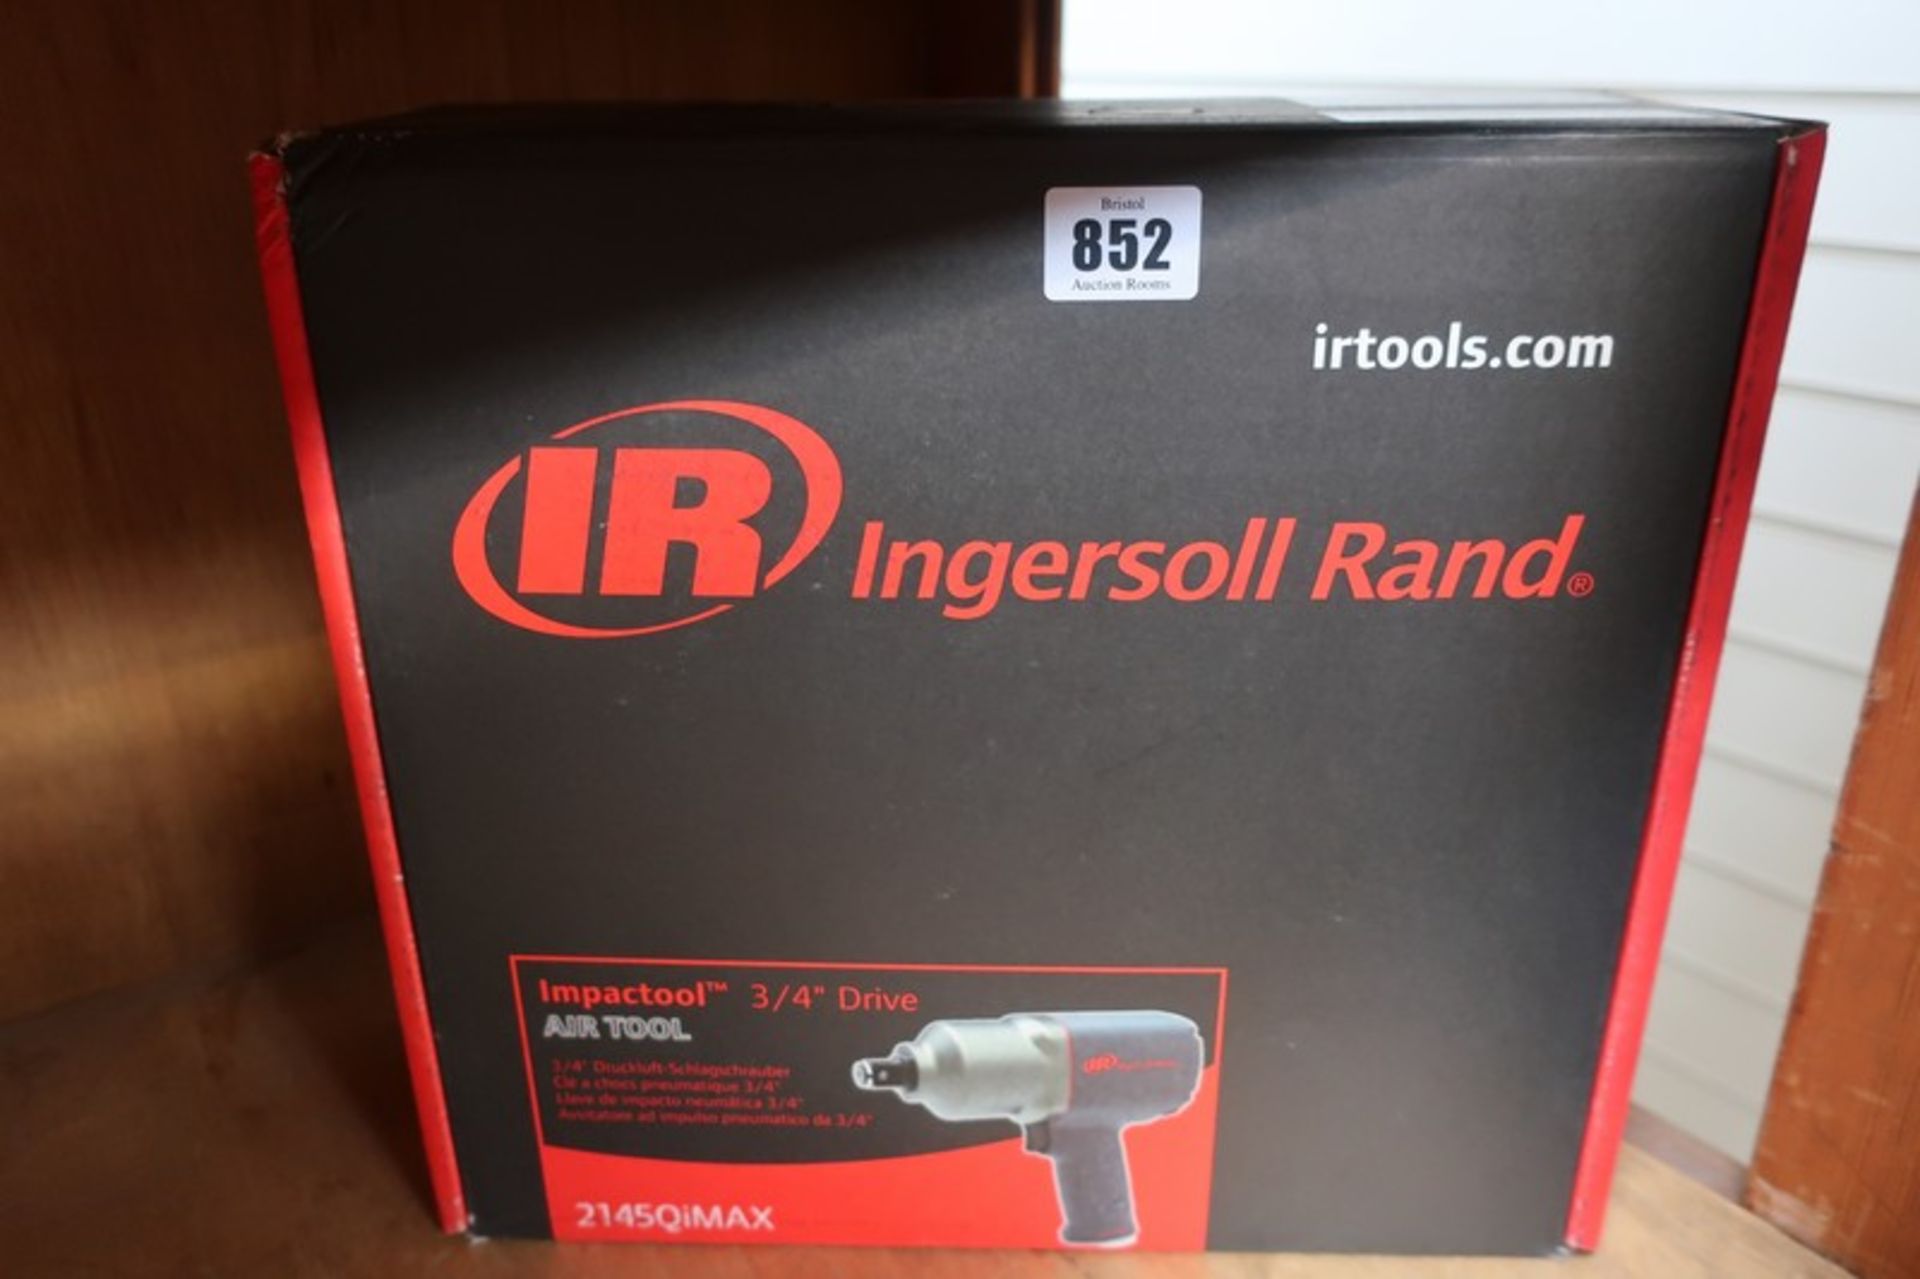 One boxed as new Ingersoll Rand 2145 QiMAX air impact wrench 3/4" drive (SR18K110270).